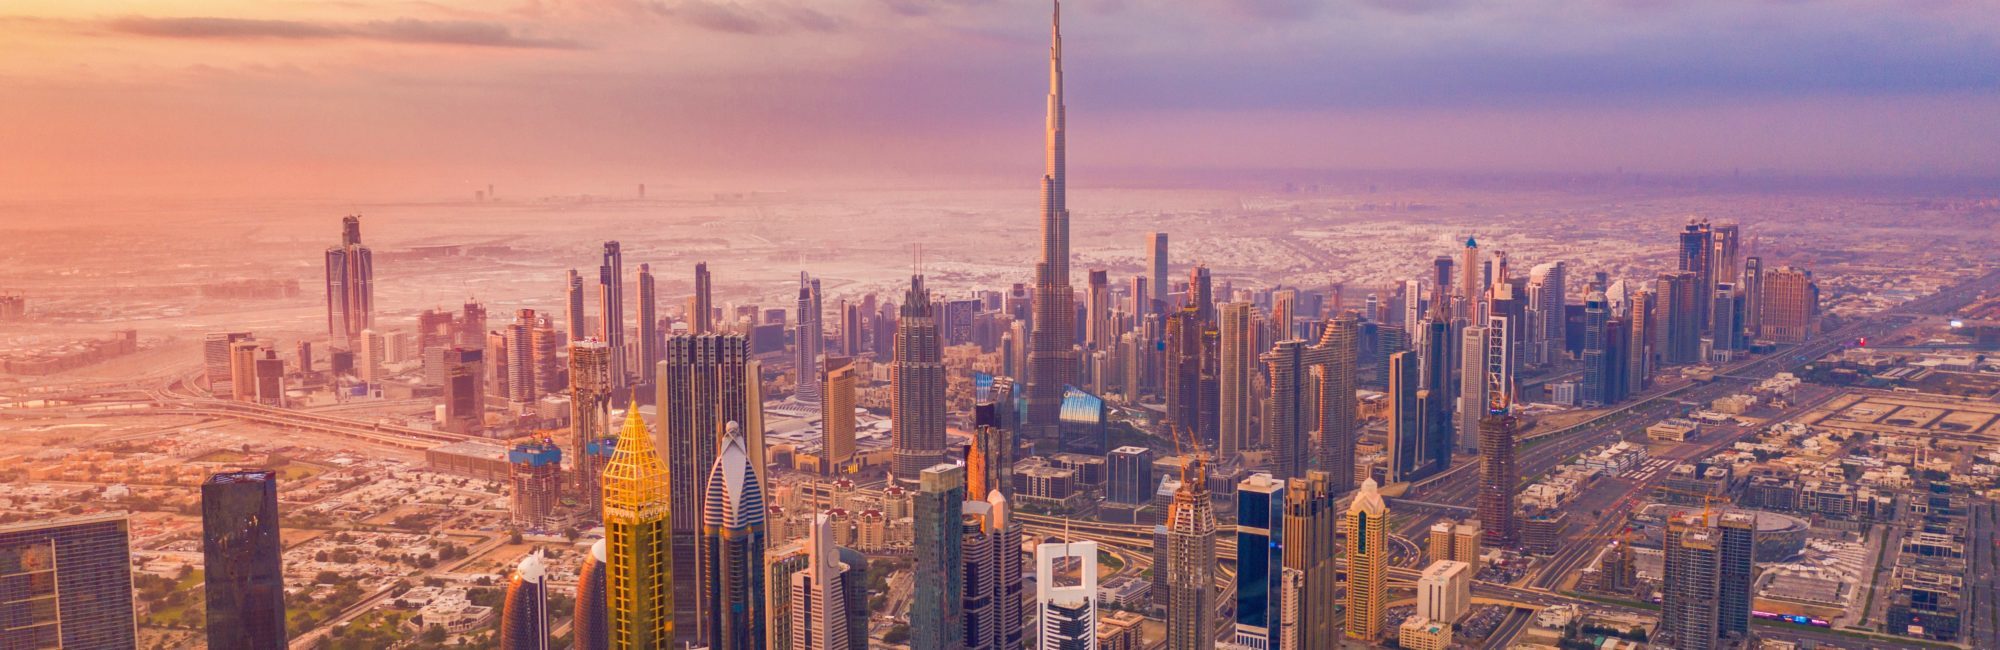 Things to See in Dubai